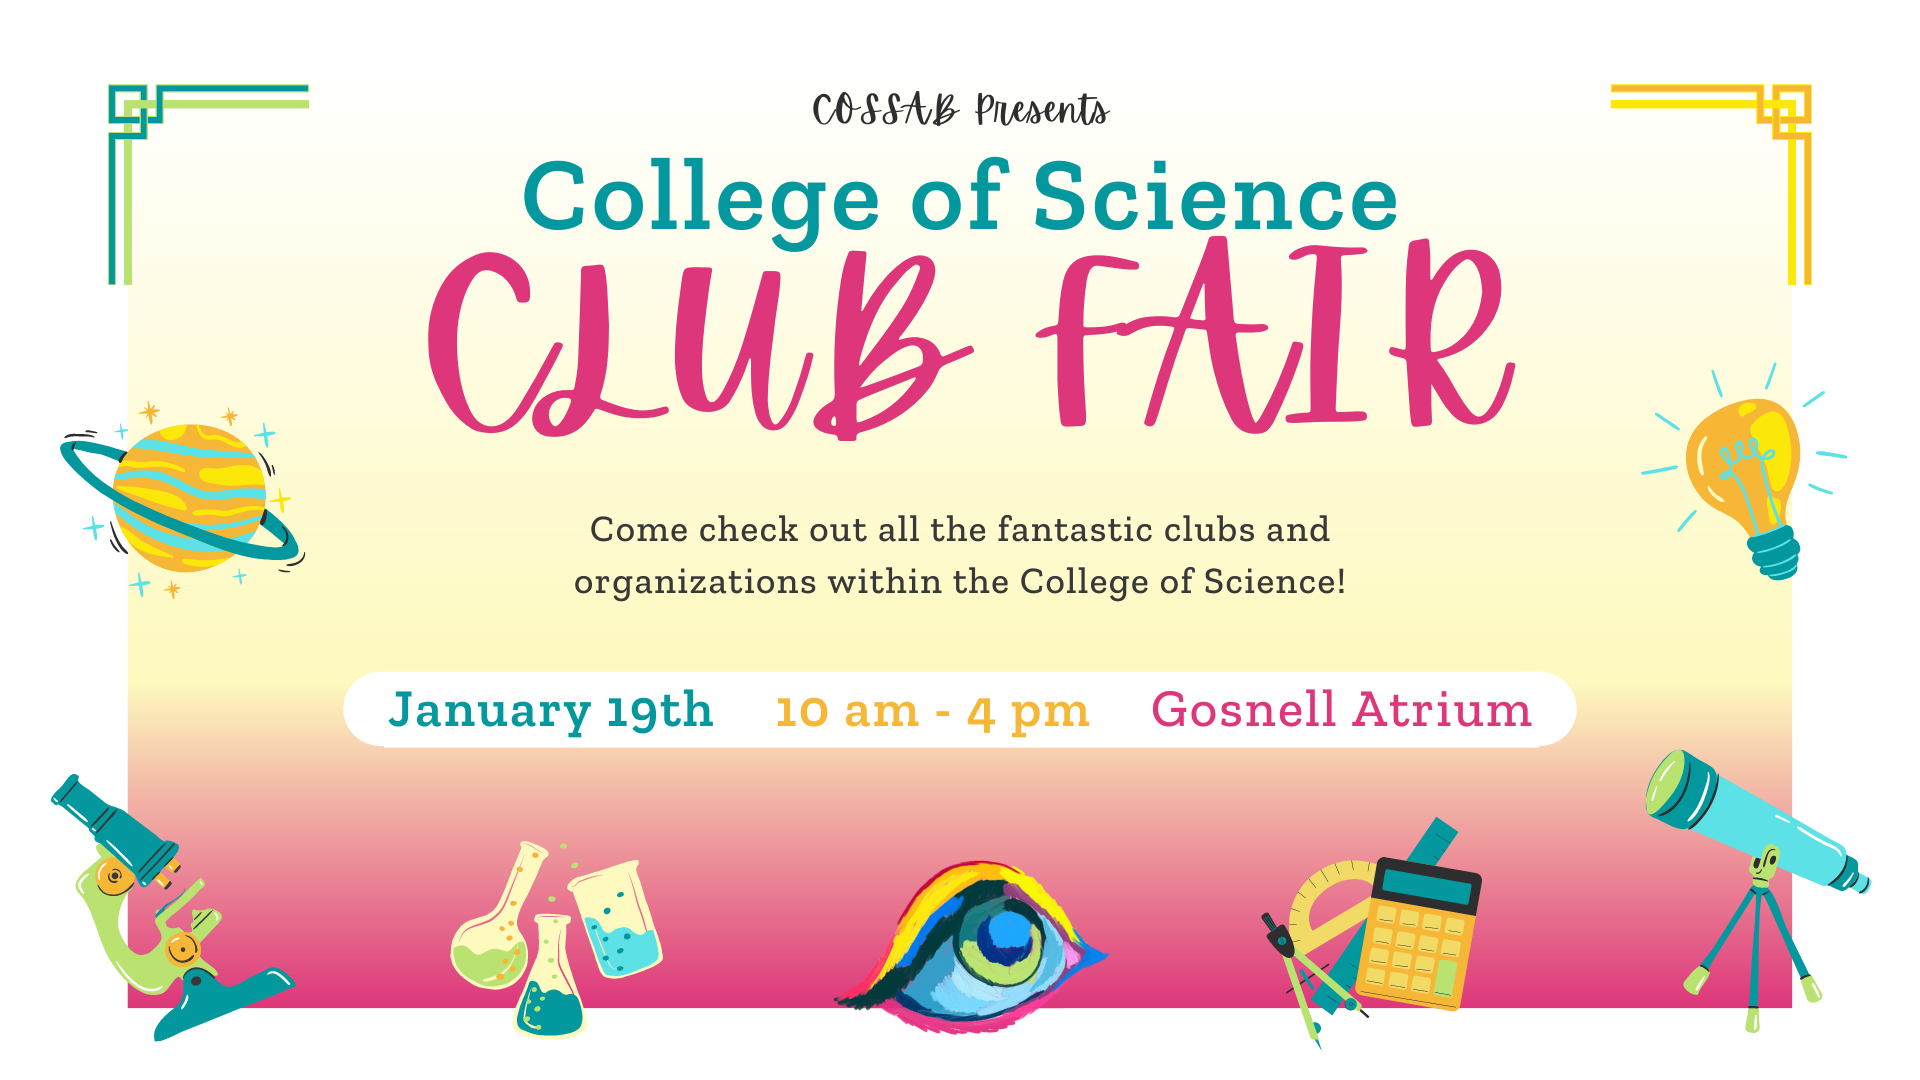 College of Science Club Fair. Come check out clubs and organizations within the College of Science. January 19th from 10am to 4pm in Gosnell Atrium.